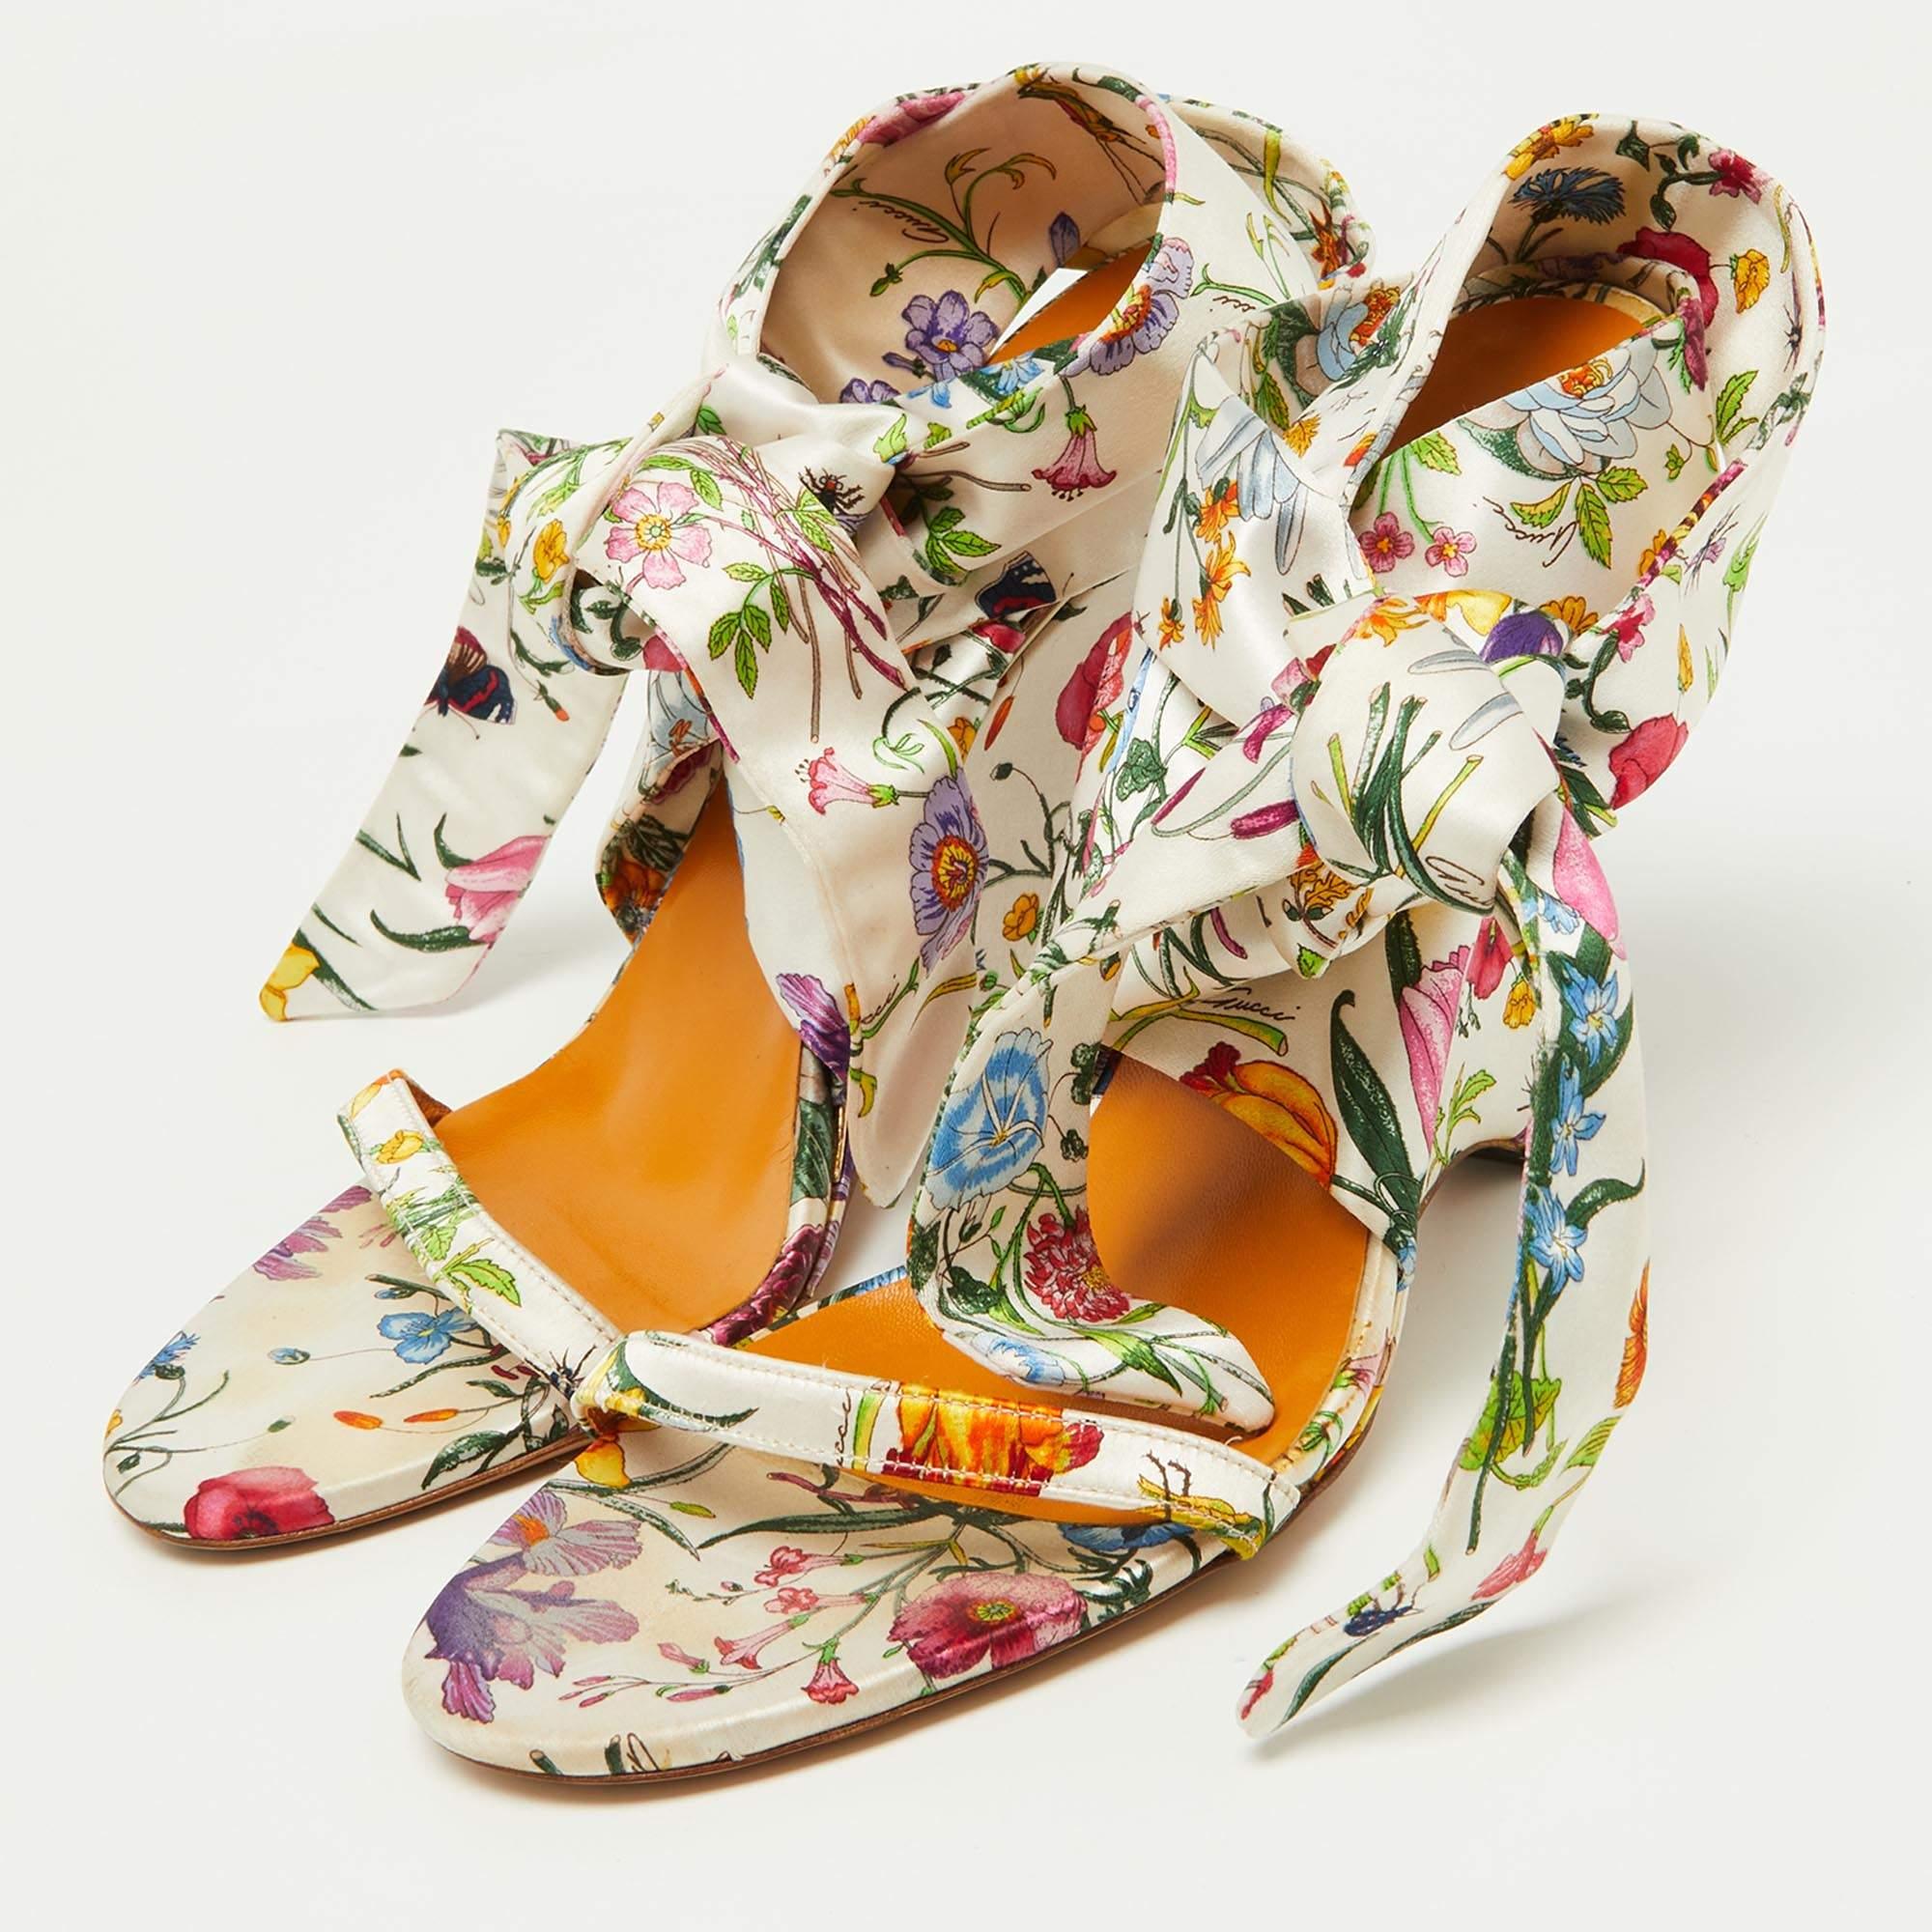 Gucci's sandals are a perfect pair to style your cute summer dresses with. Designed in a floral print satin with an ankle strap tie-around closure, they have wedge heels to wear all day long.

